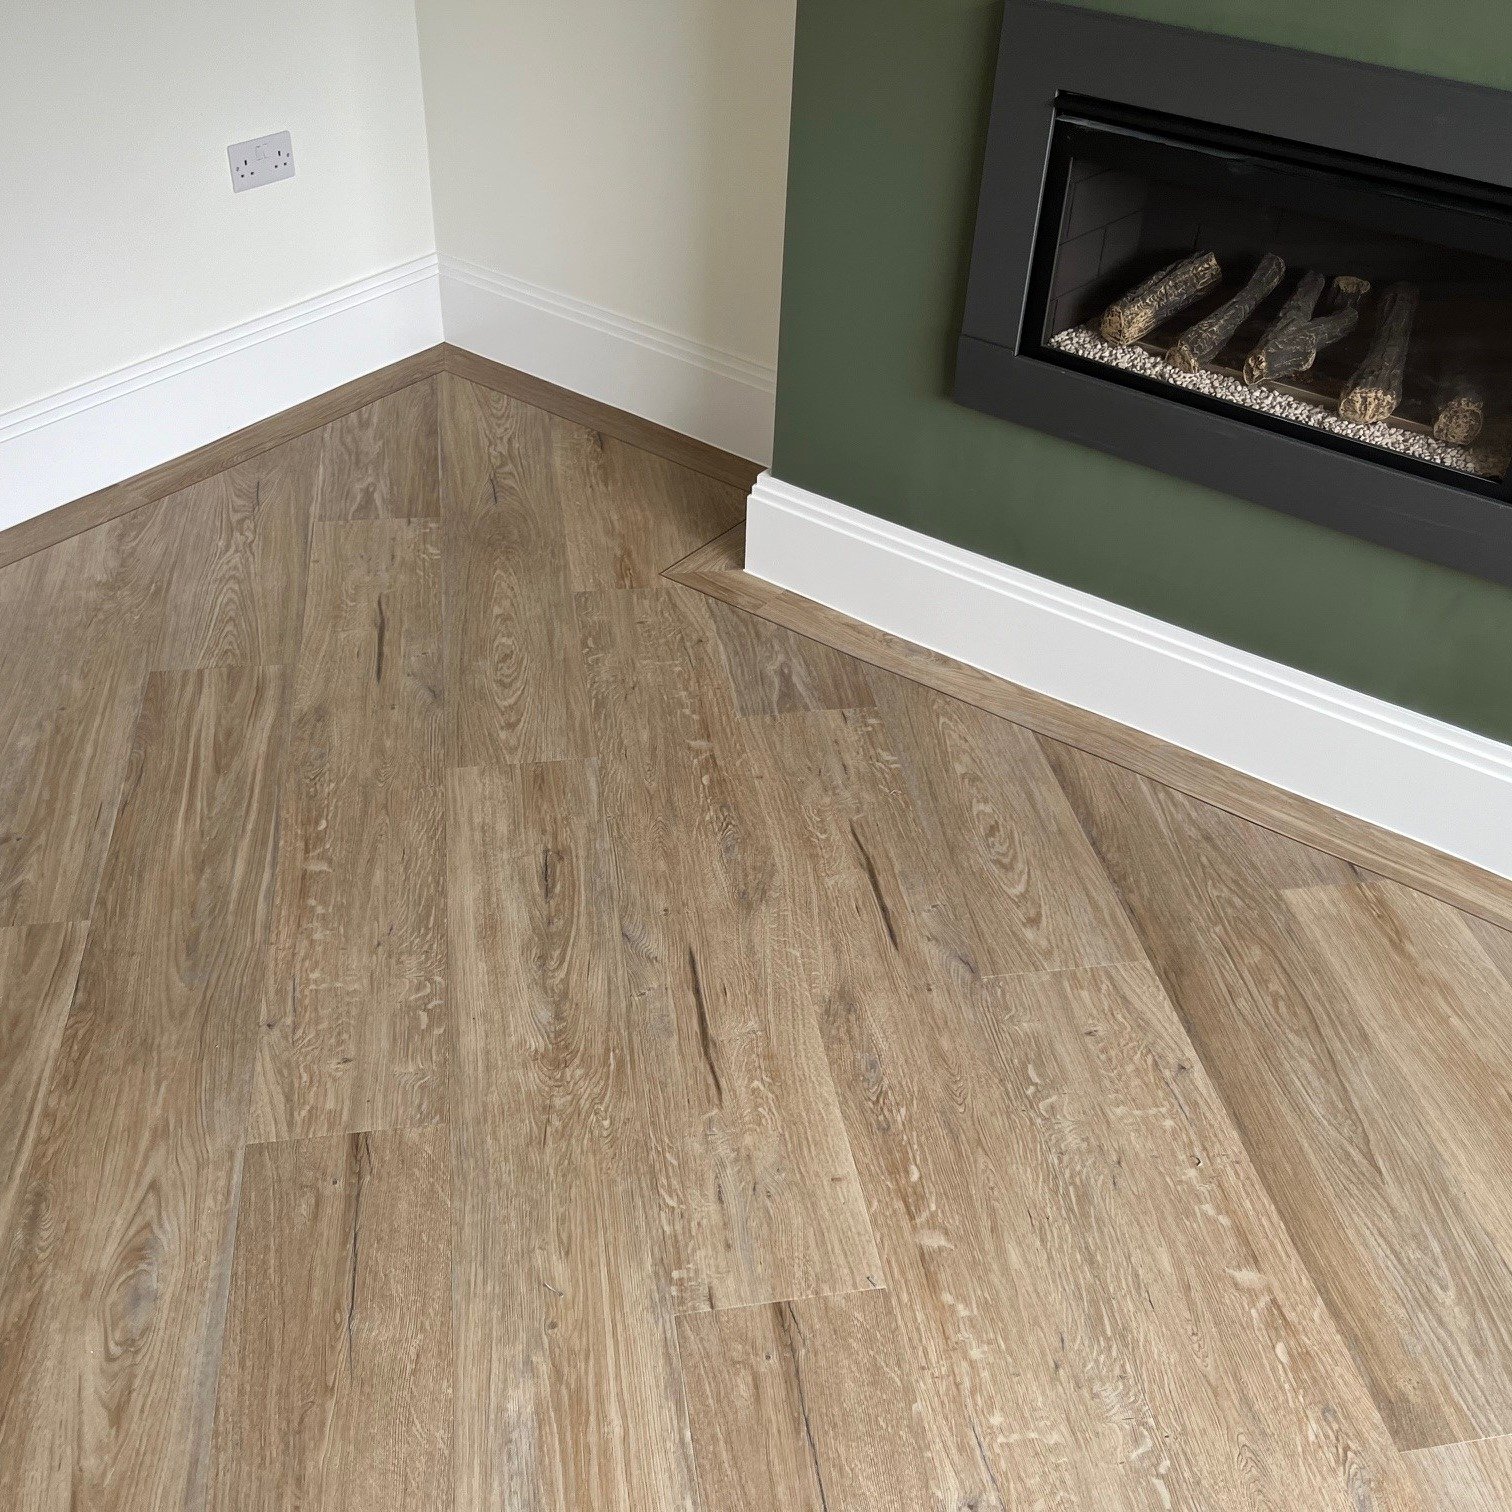 📸 @karndean_uk  Van Gogh - Hayfield Oak VGW8241 😍

This colour is definitely becoming one of our new favourites! 👌

Fitted by us last week. Plank perimeter border and 45 degree main field with Coffee Feature Strip! 
.
.
.
 #feedback #sbffloors #ka